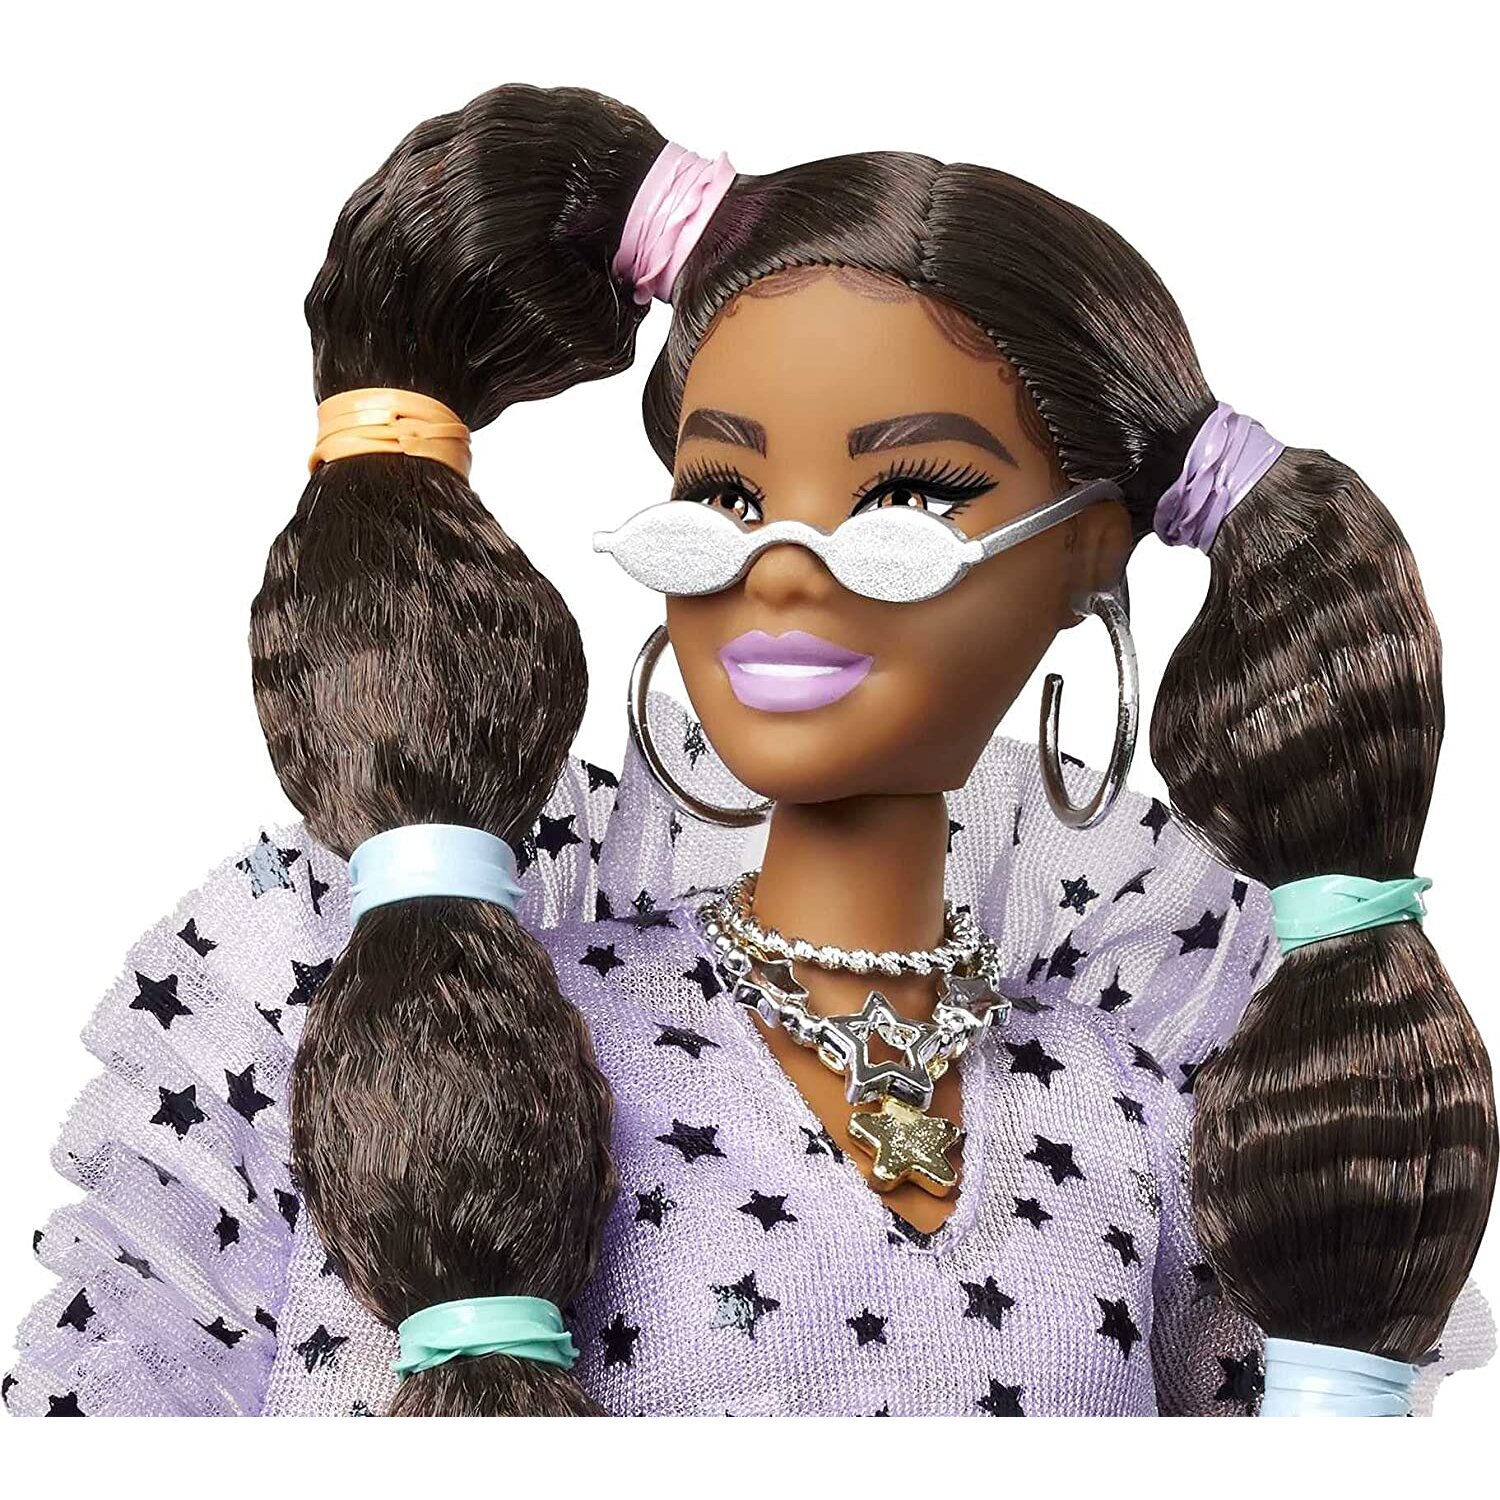 Barbie Extra Doll with Bobble Pigtails